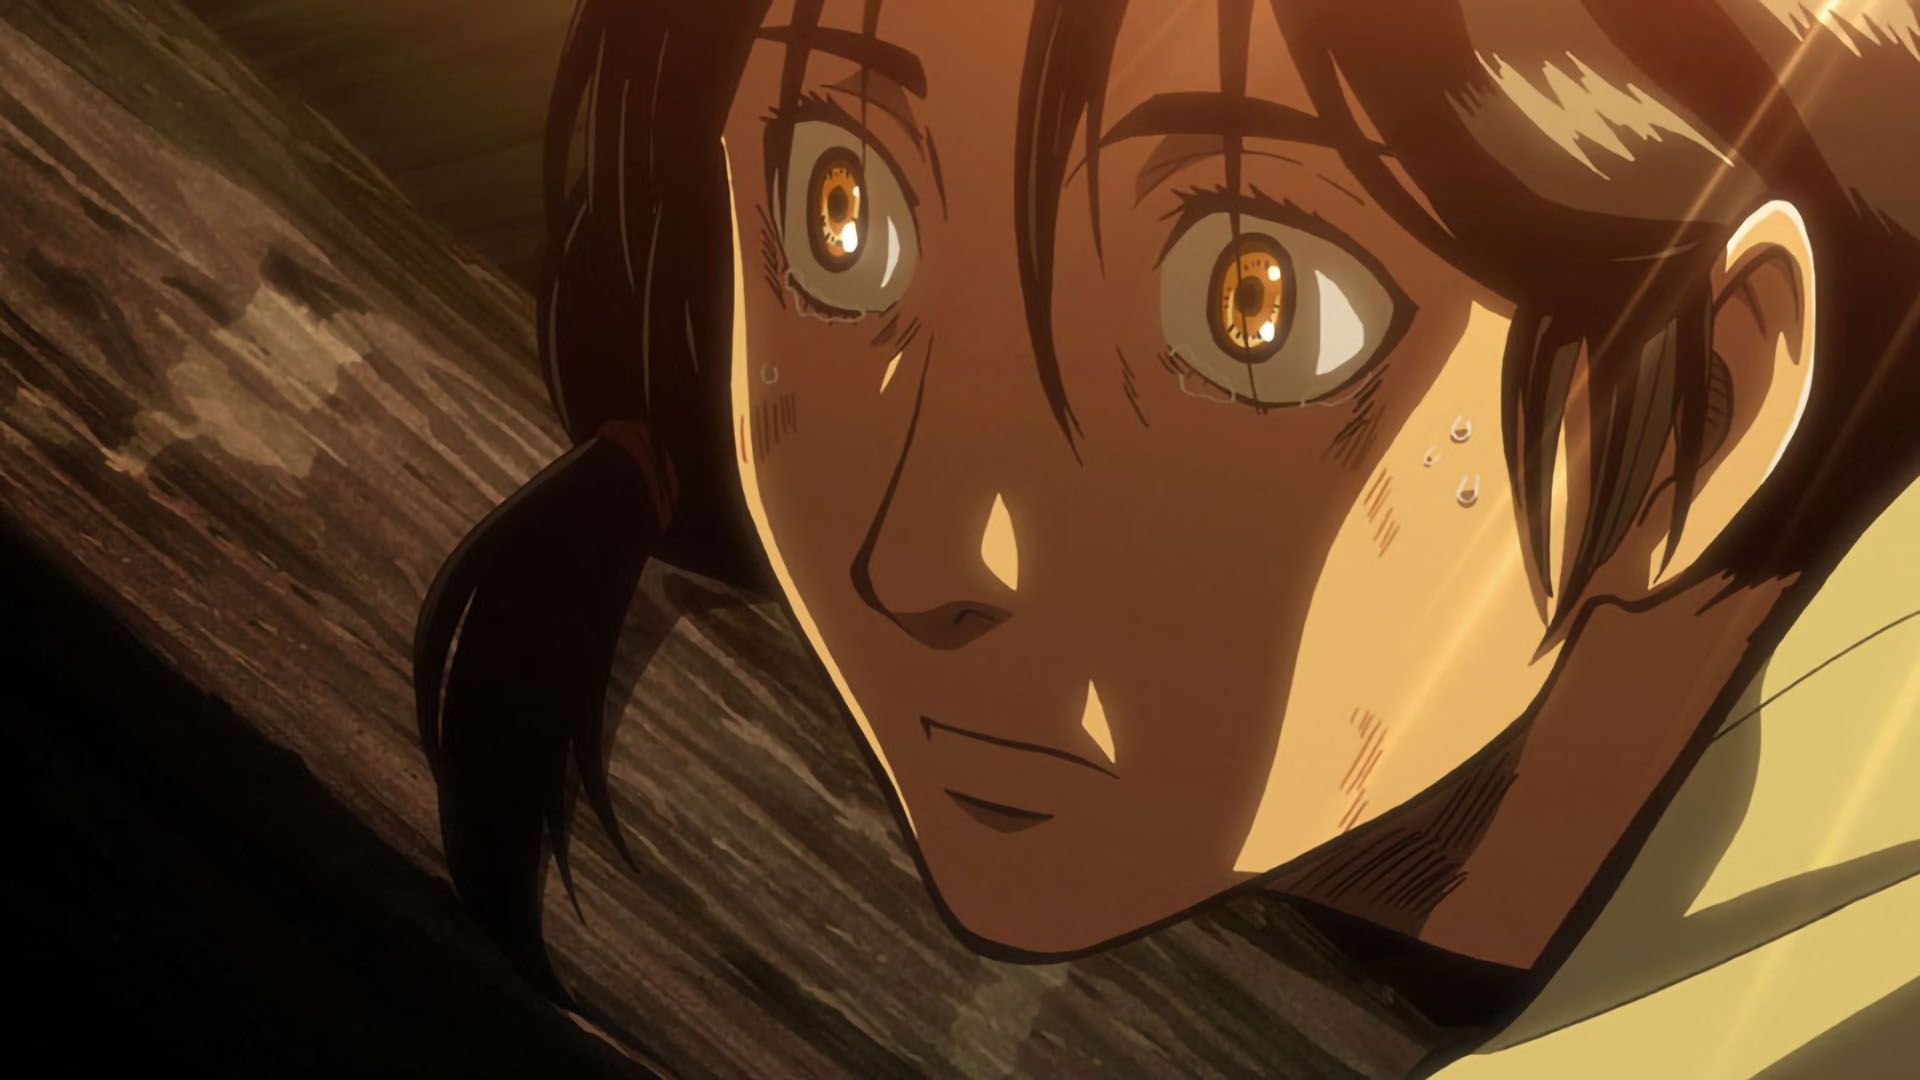 Attack On Titan Mom Porn - Watch Full Episodes of Attack on Titan, a Part of Toonami on Adult Swim